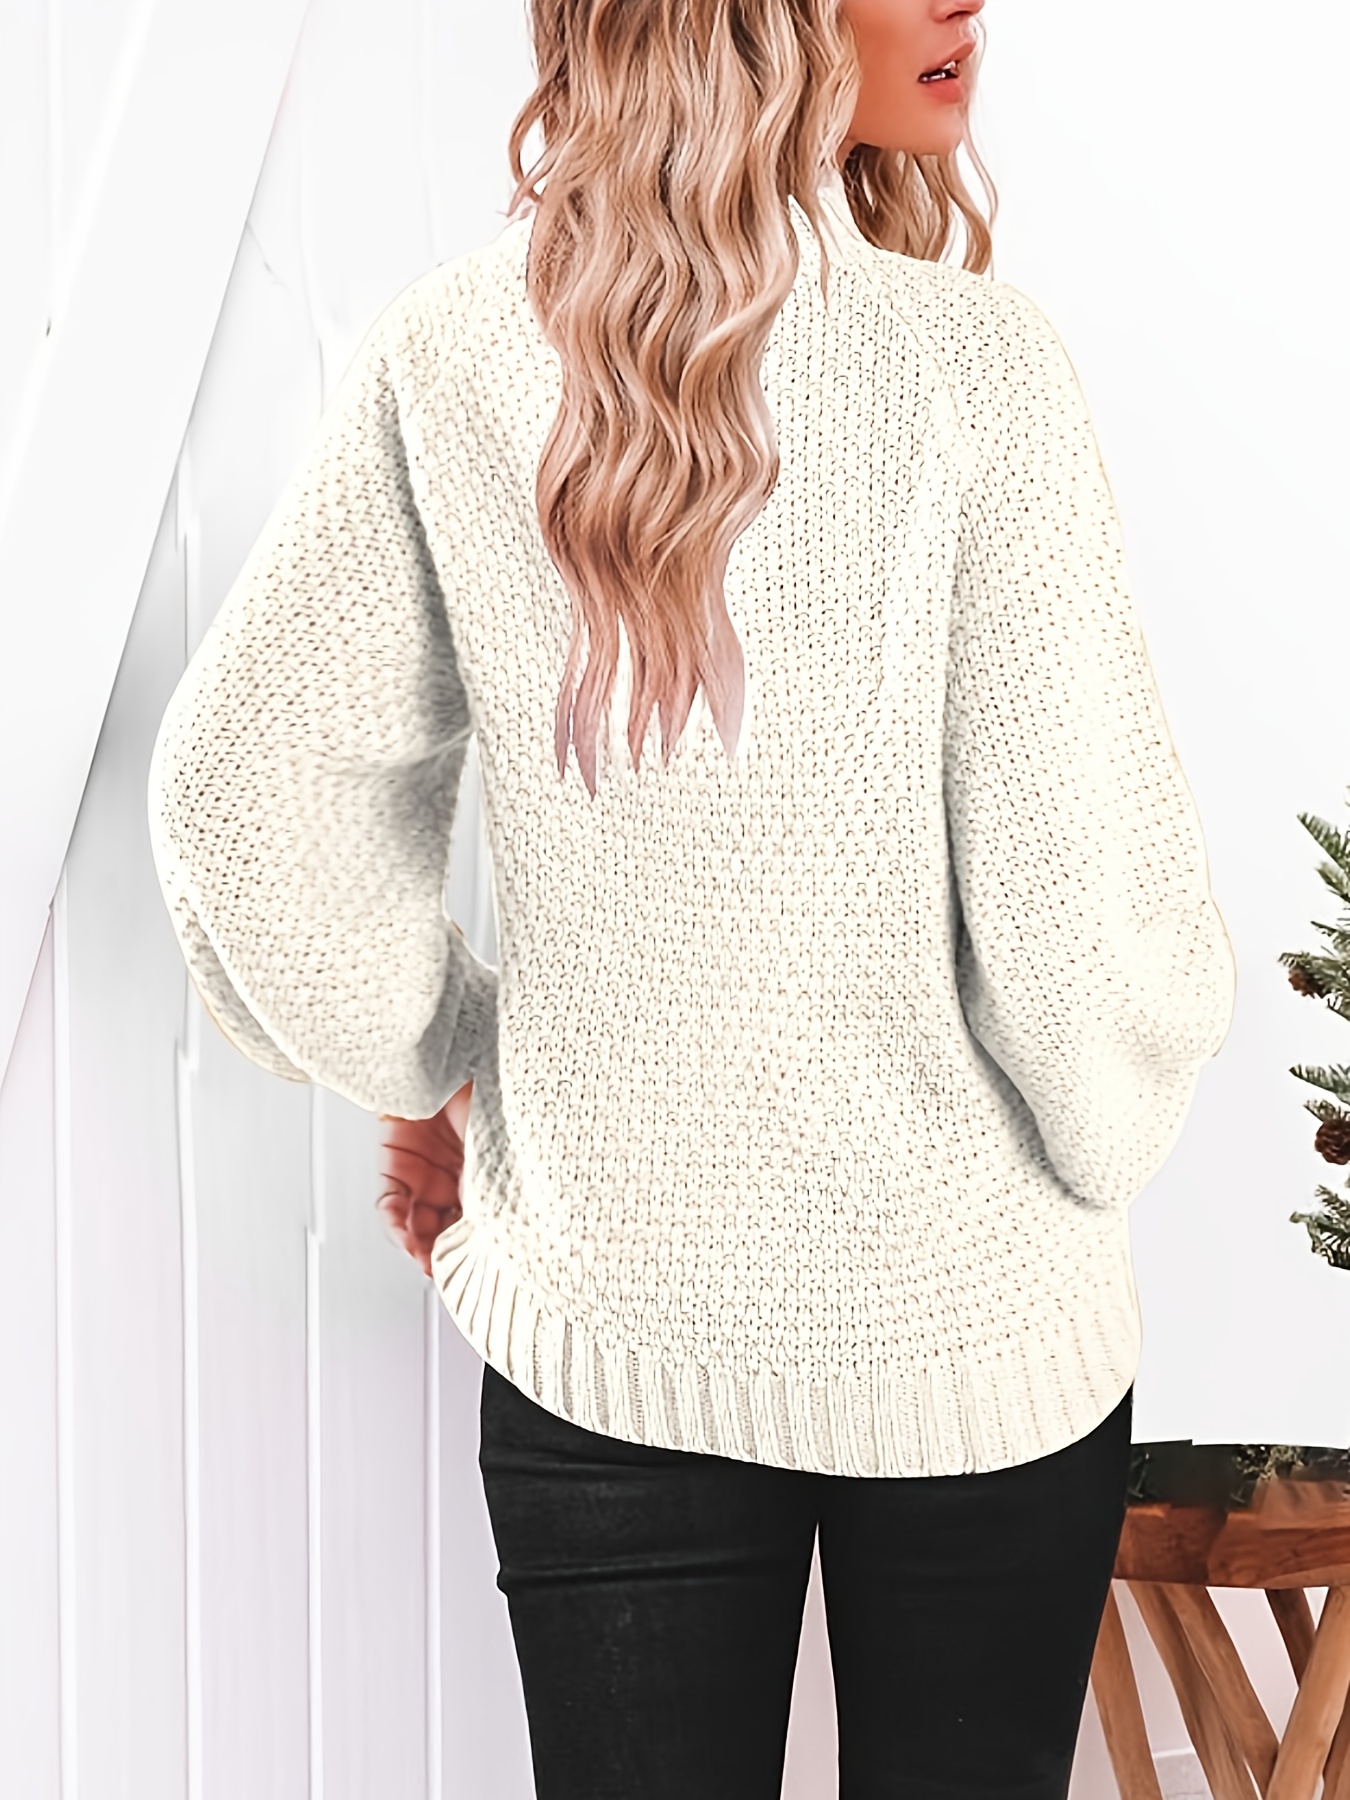 Oversized Scoop Neck Sweater, Casual Long Sleeve Loose Fall Winter Knit  Sweater, Women's Clothing